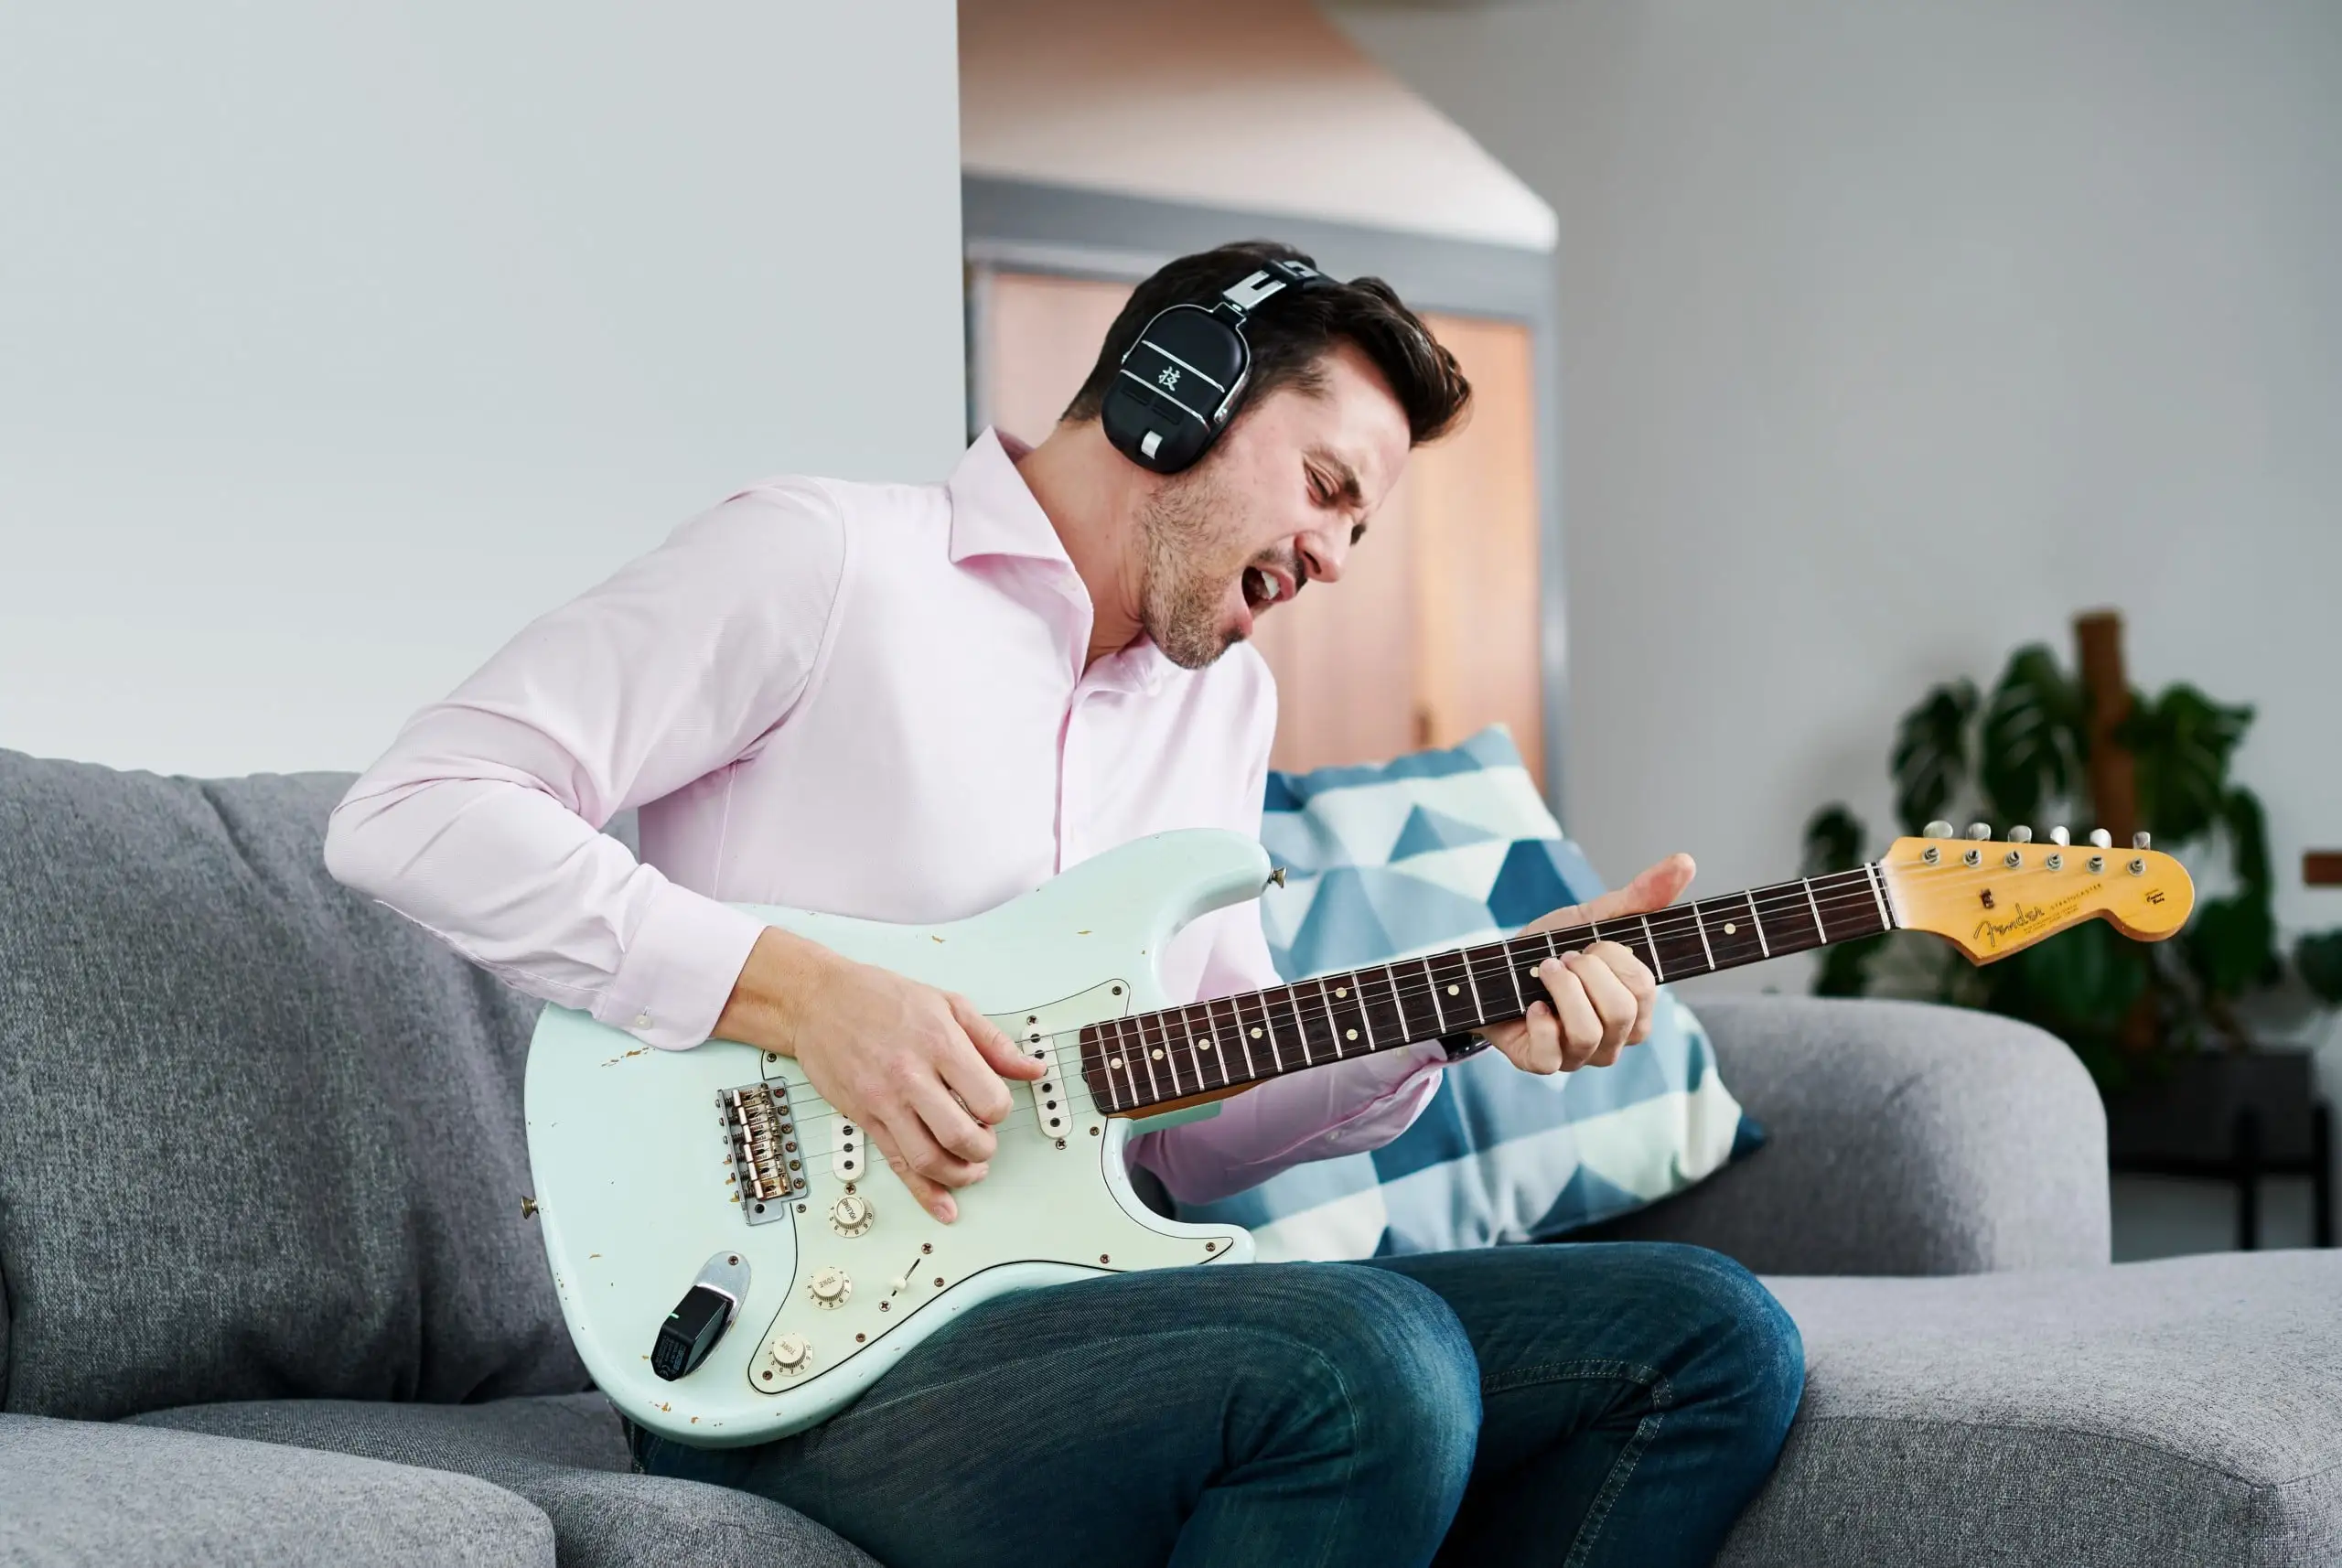 BOSS Introduces Waza-Air Wireless Personal Guitar Amplification System